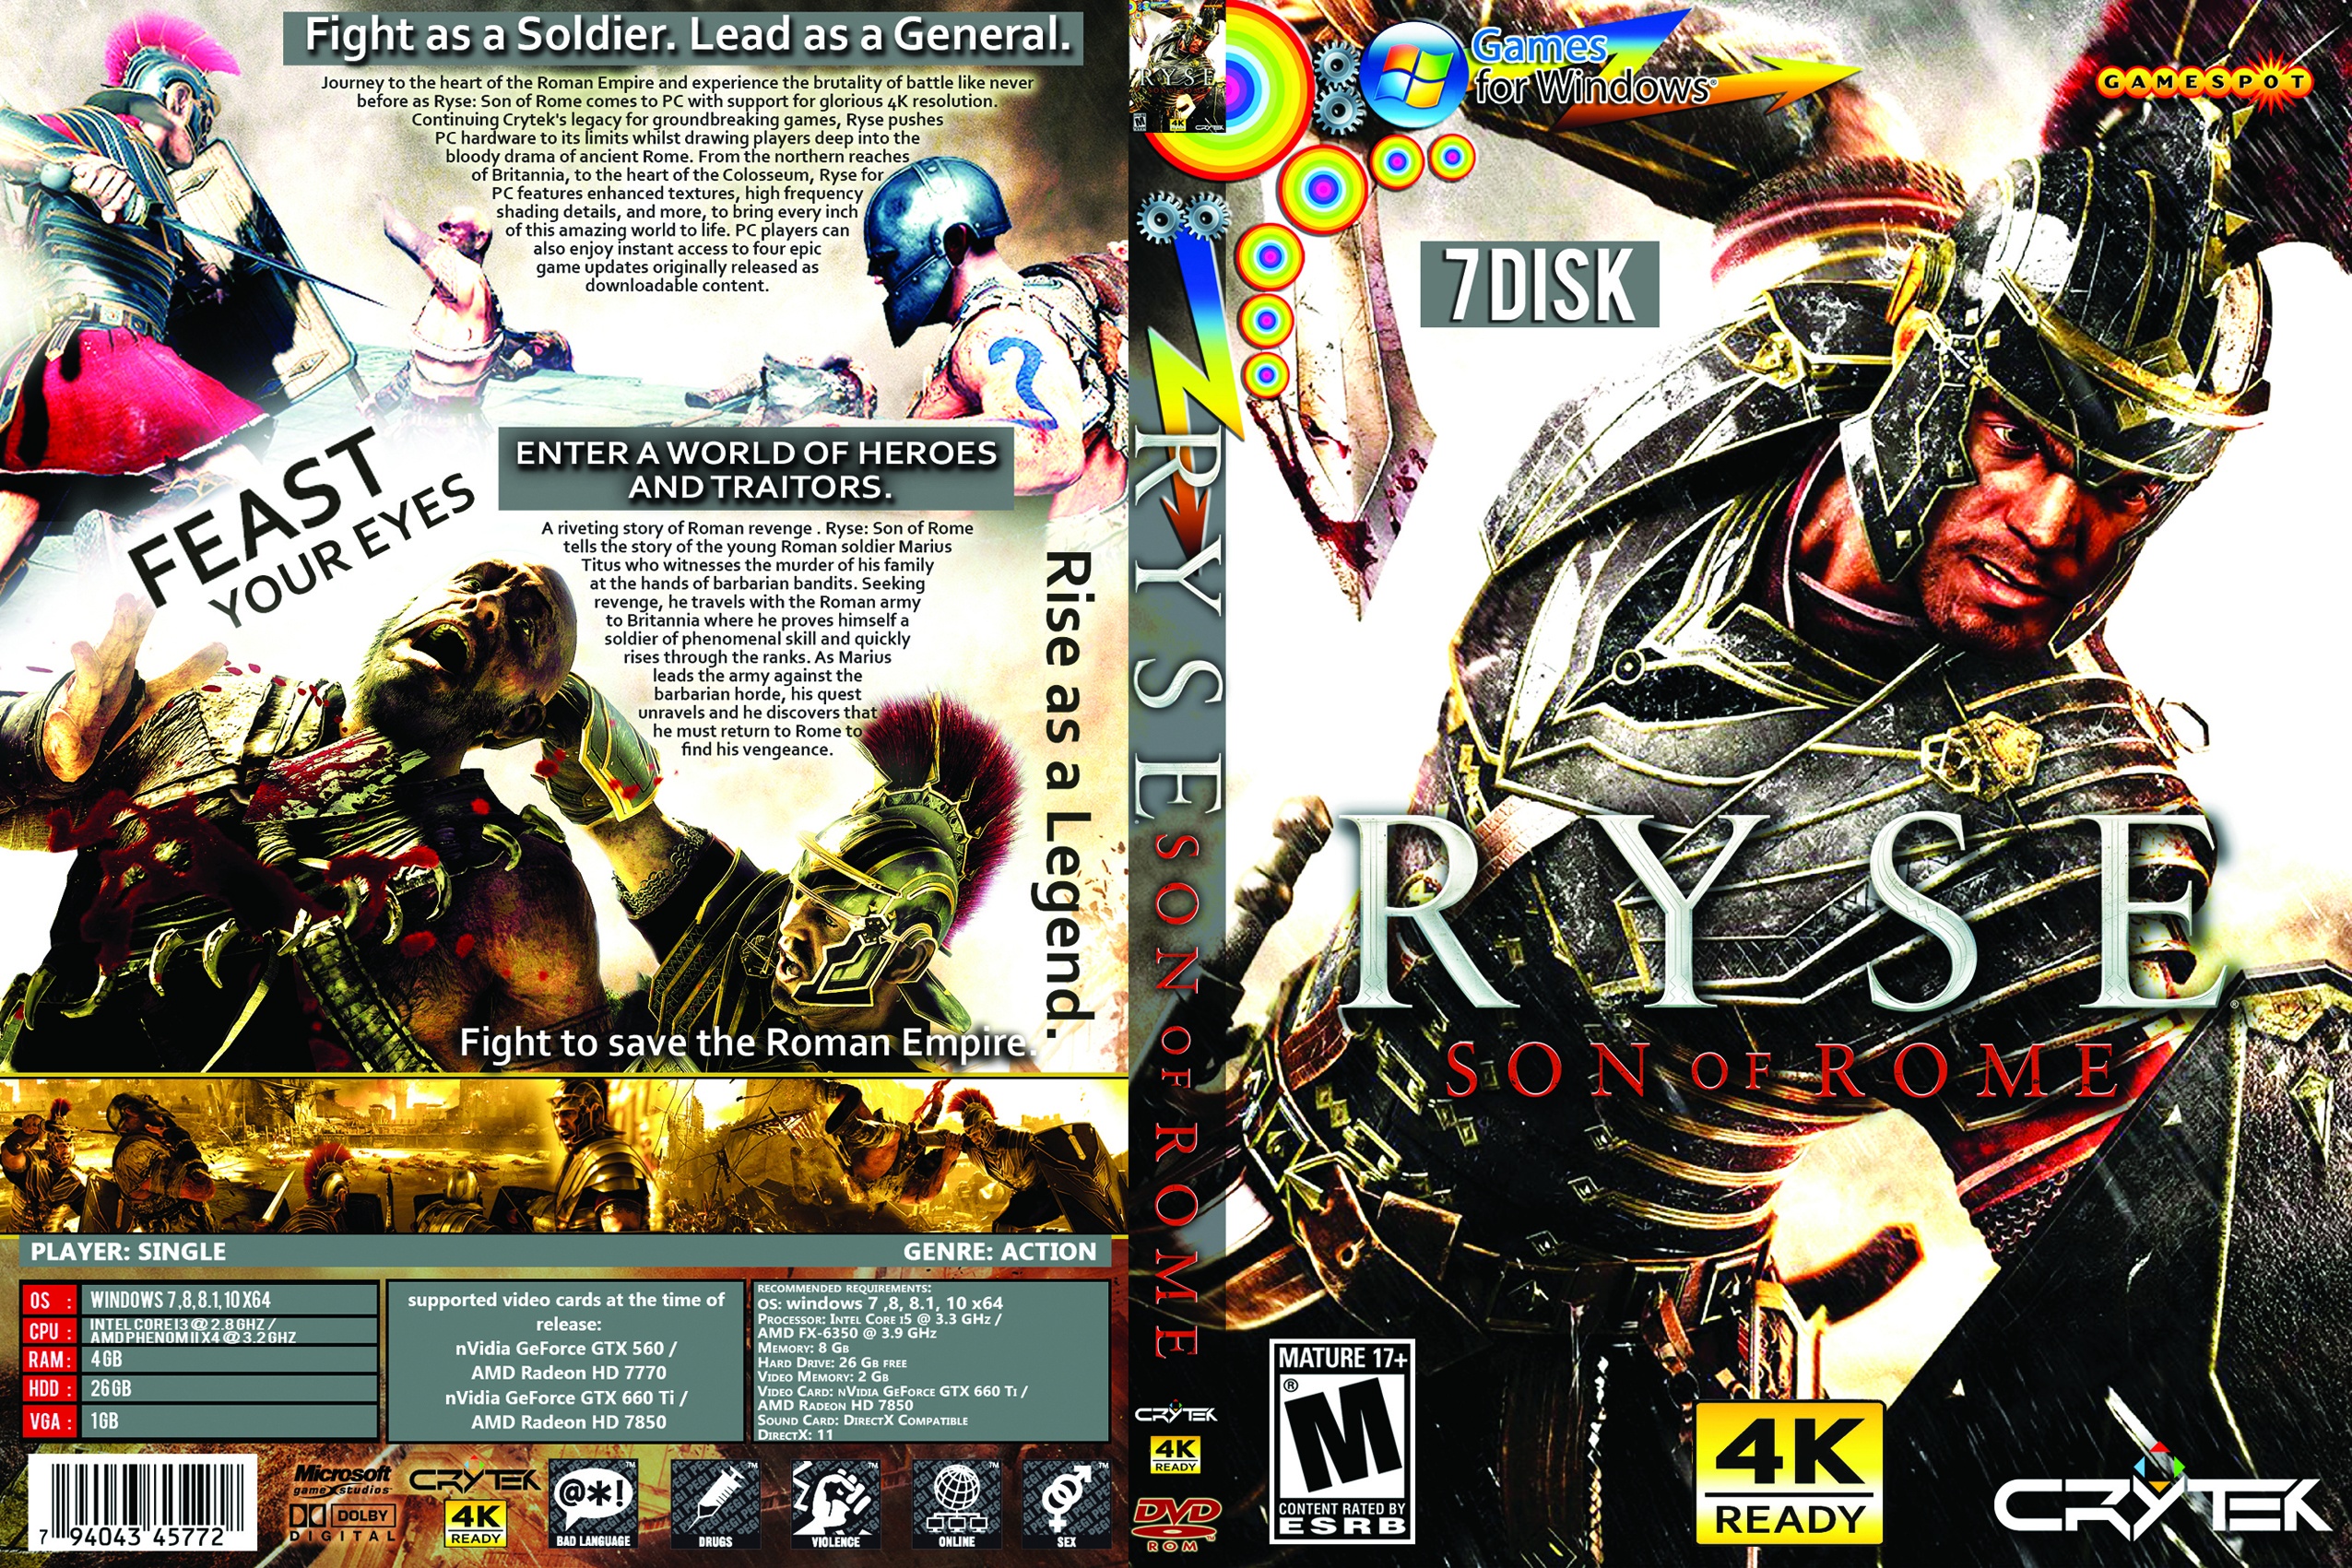 Ryse: Son of Rome box cover